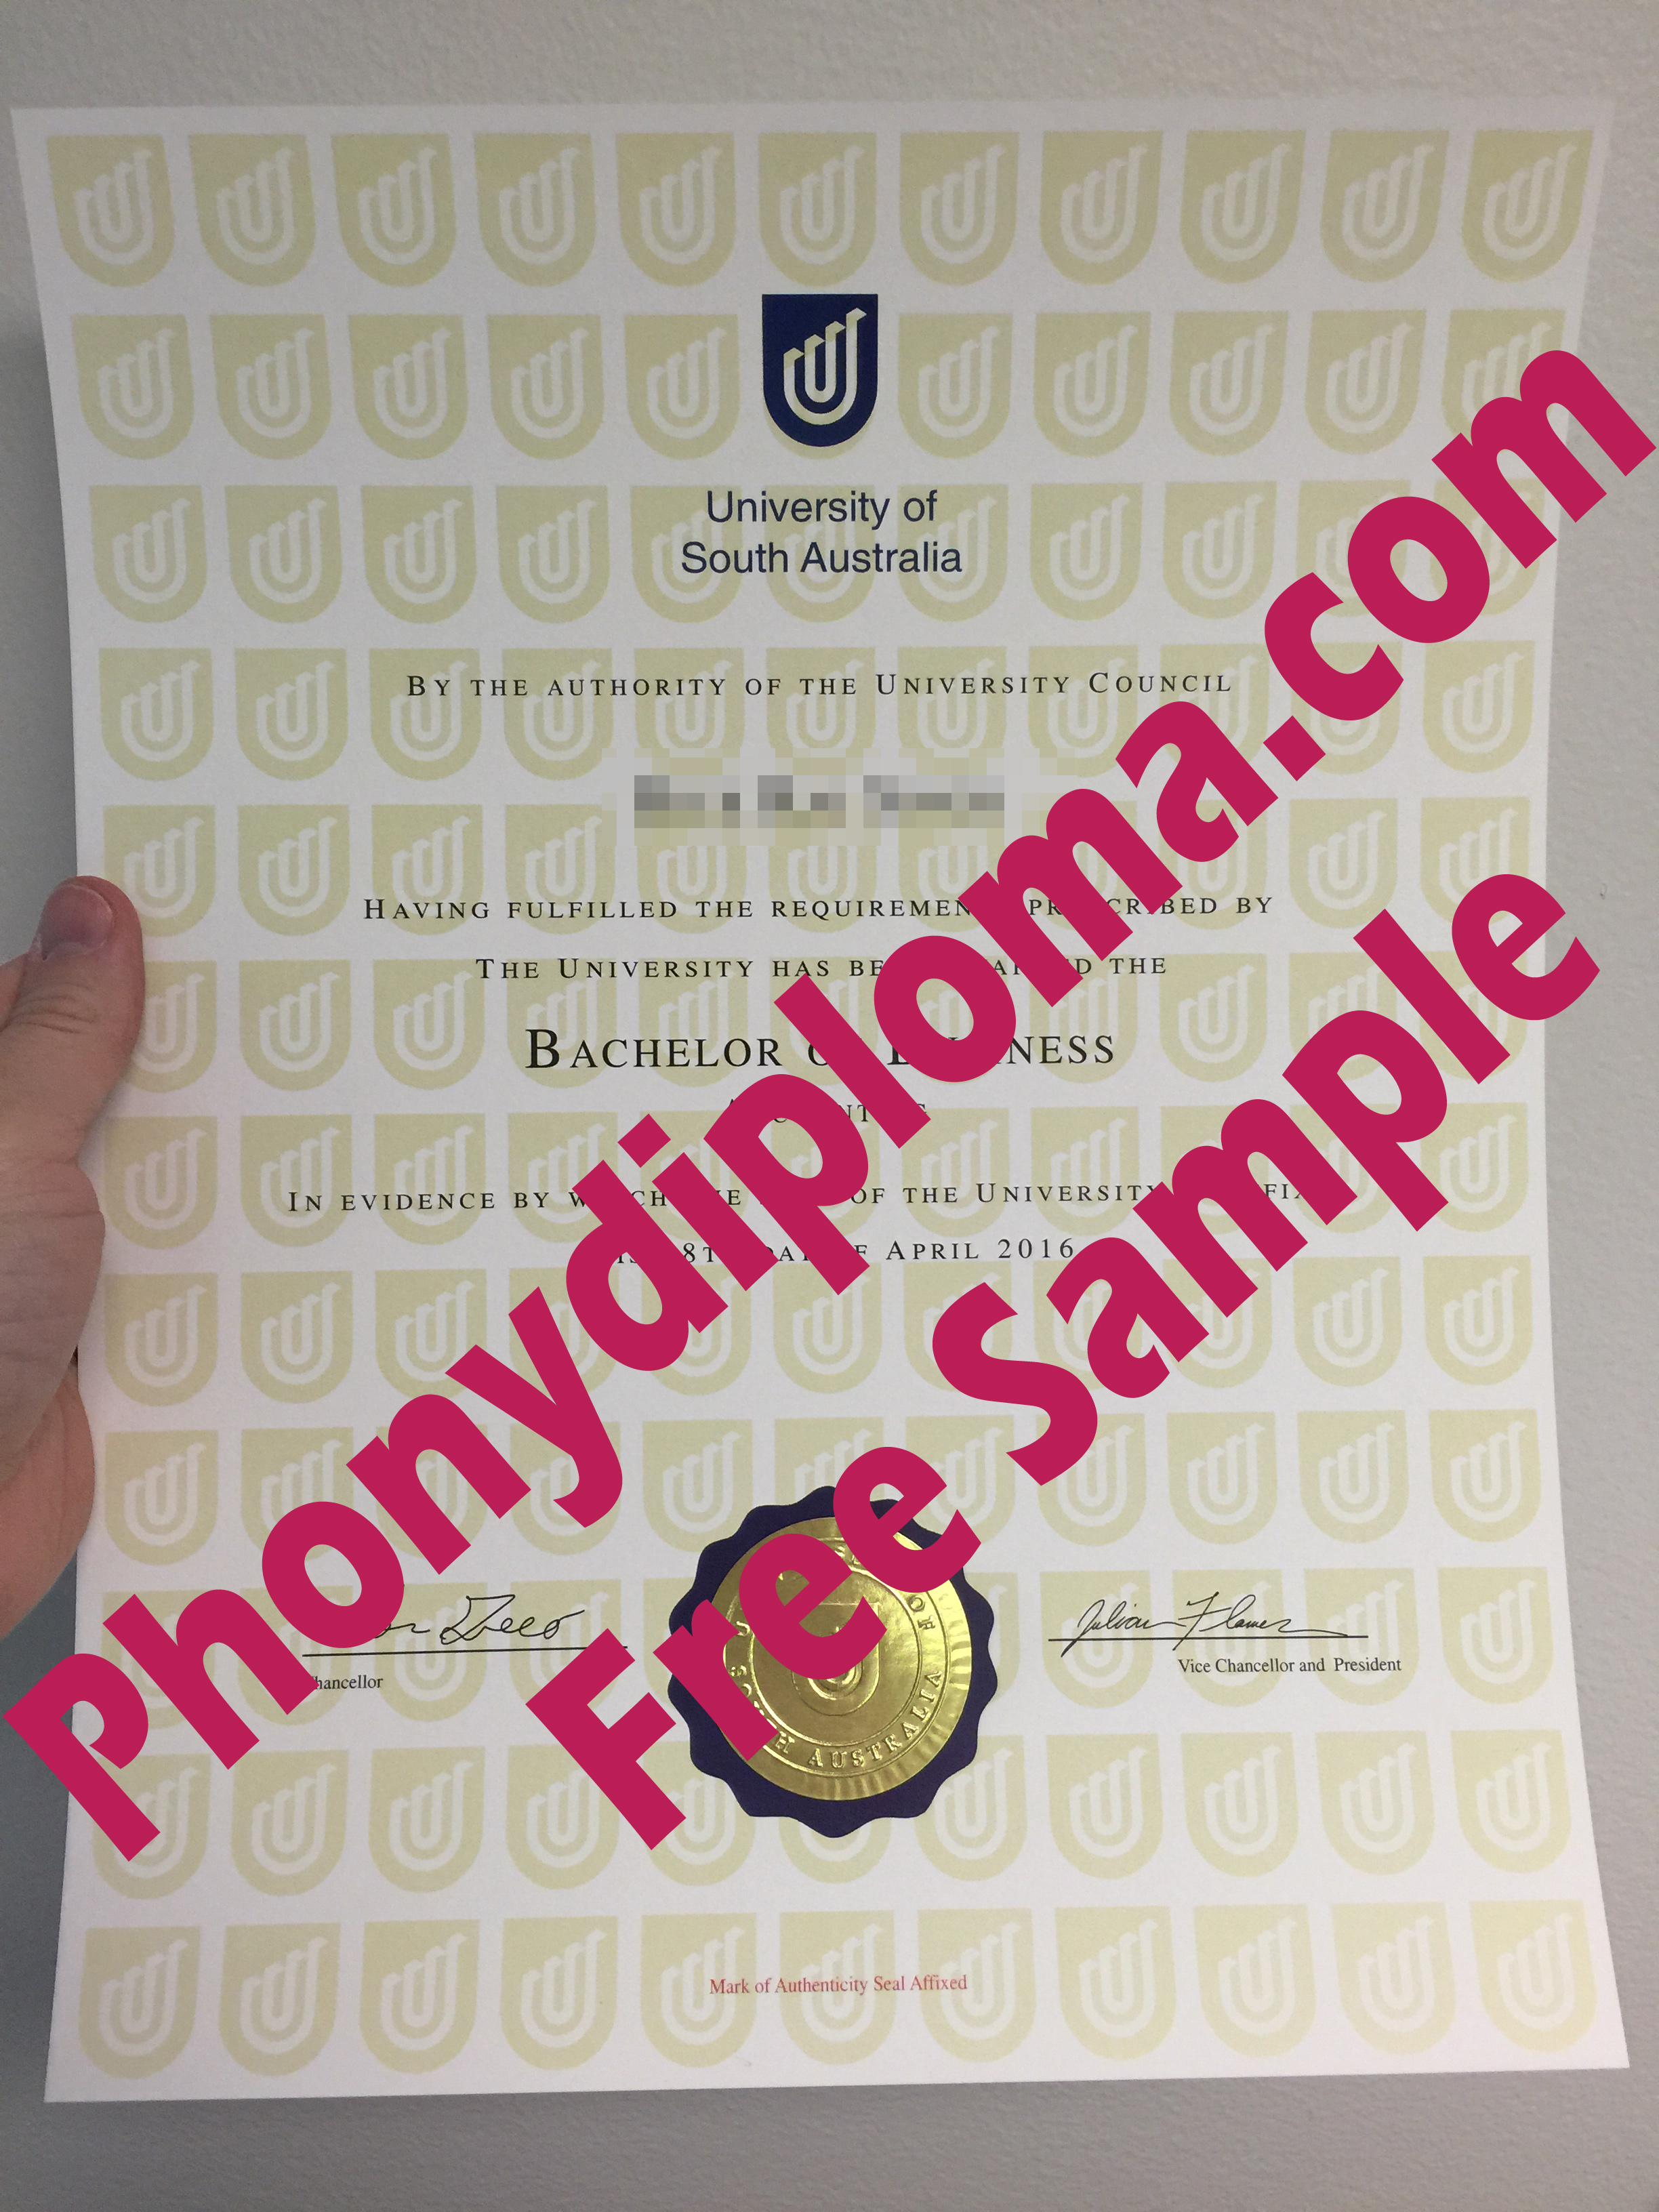 University Of South Australia Free Sample From Phonydiploma (2)